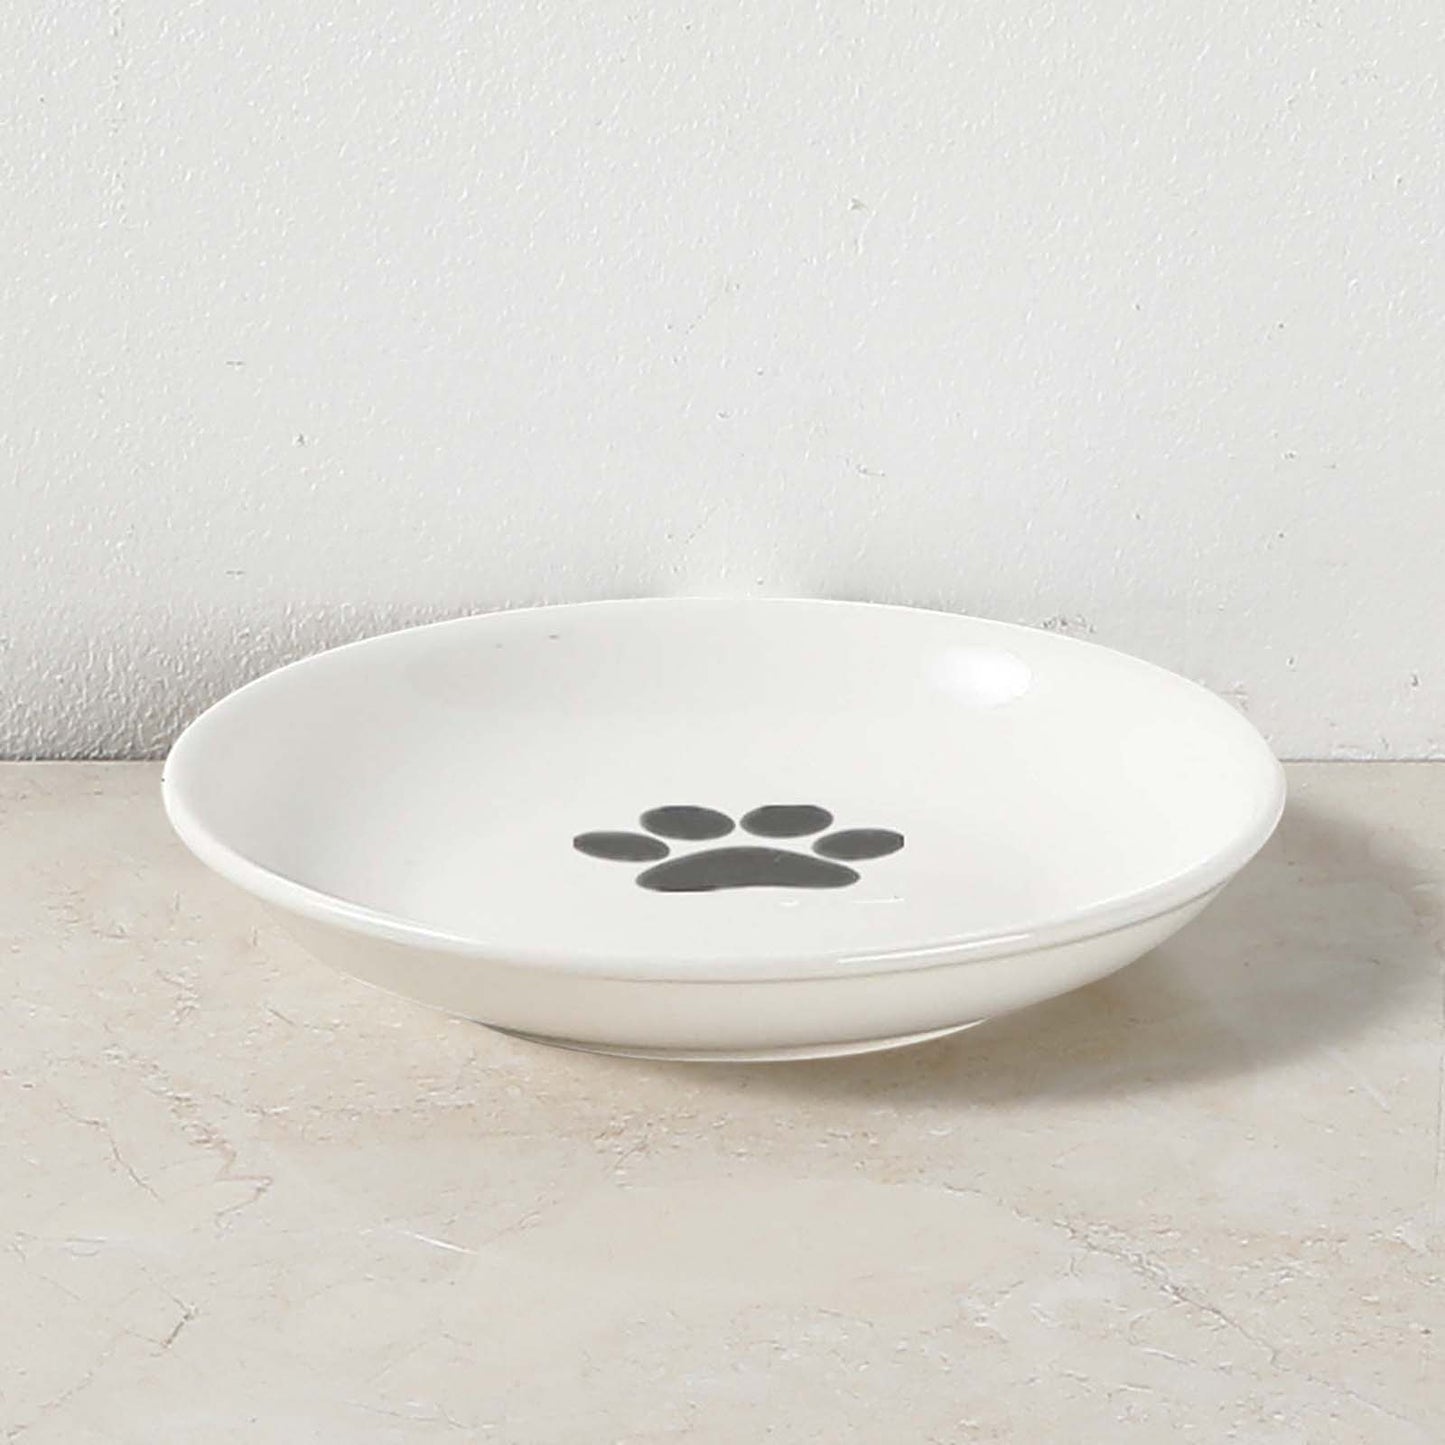 Ceramic Raised Pet Bowl Food Water Treats for Cats &amp; Dogs Supplies Outdoor Feeding Drinking Accessories Doggie Cat Stand Bowl